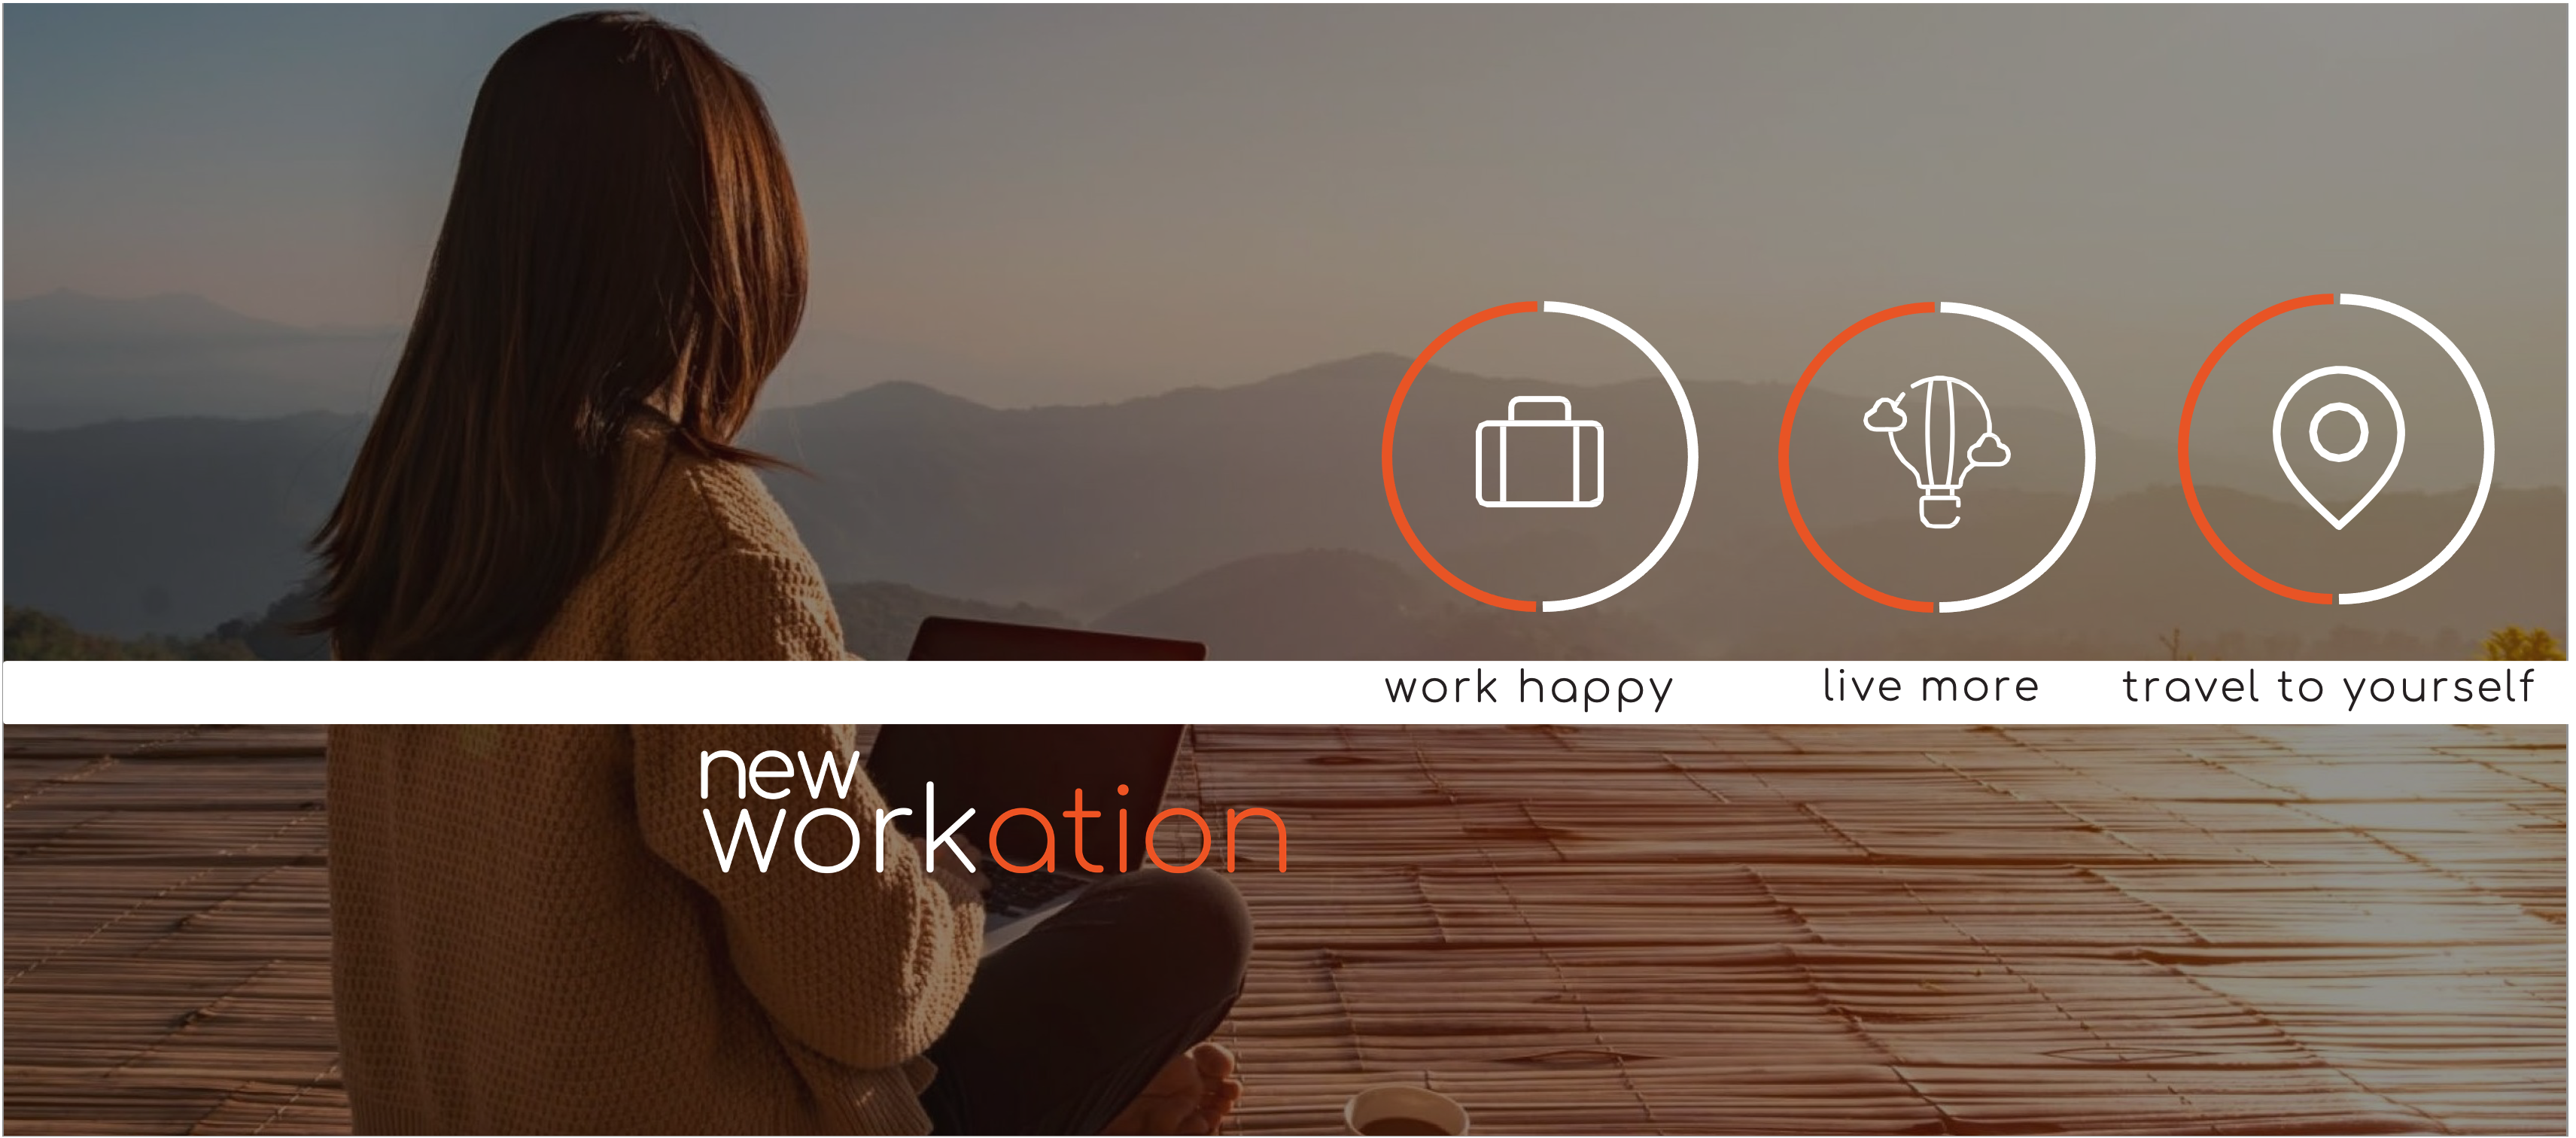 newworkation.com| wlt / startup from München / Background